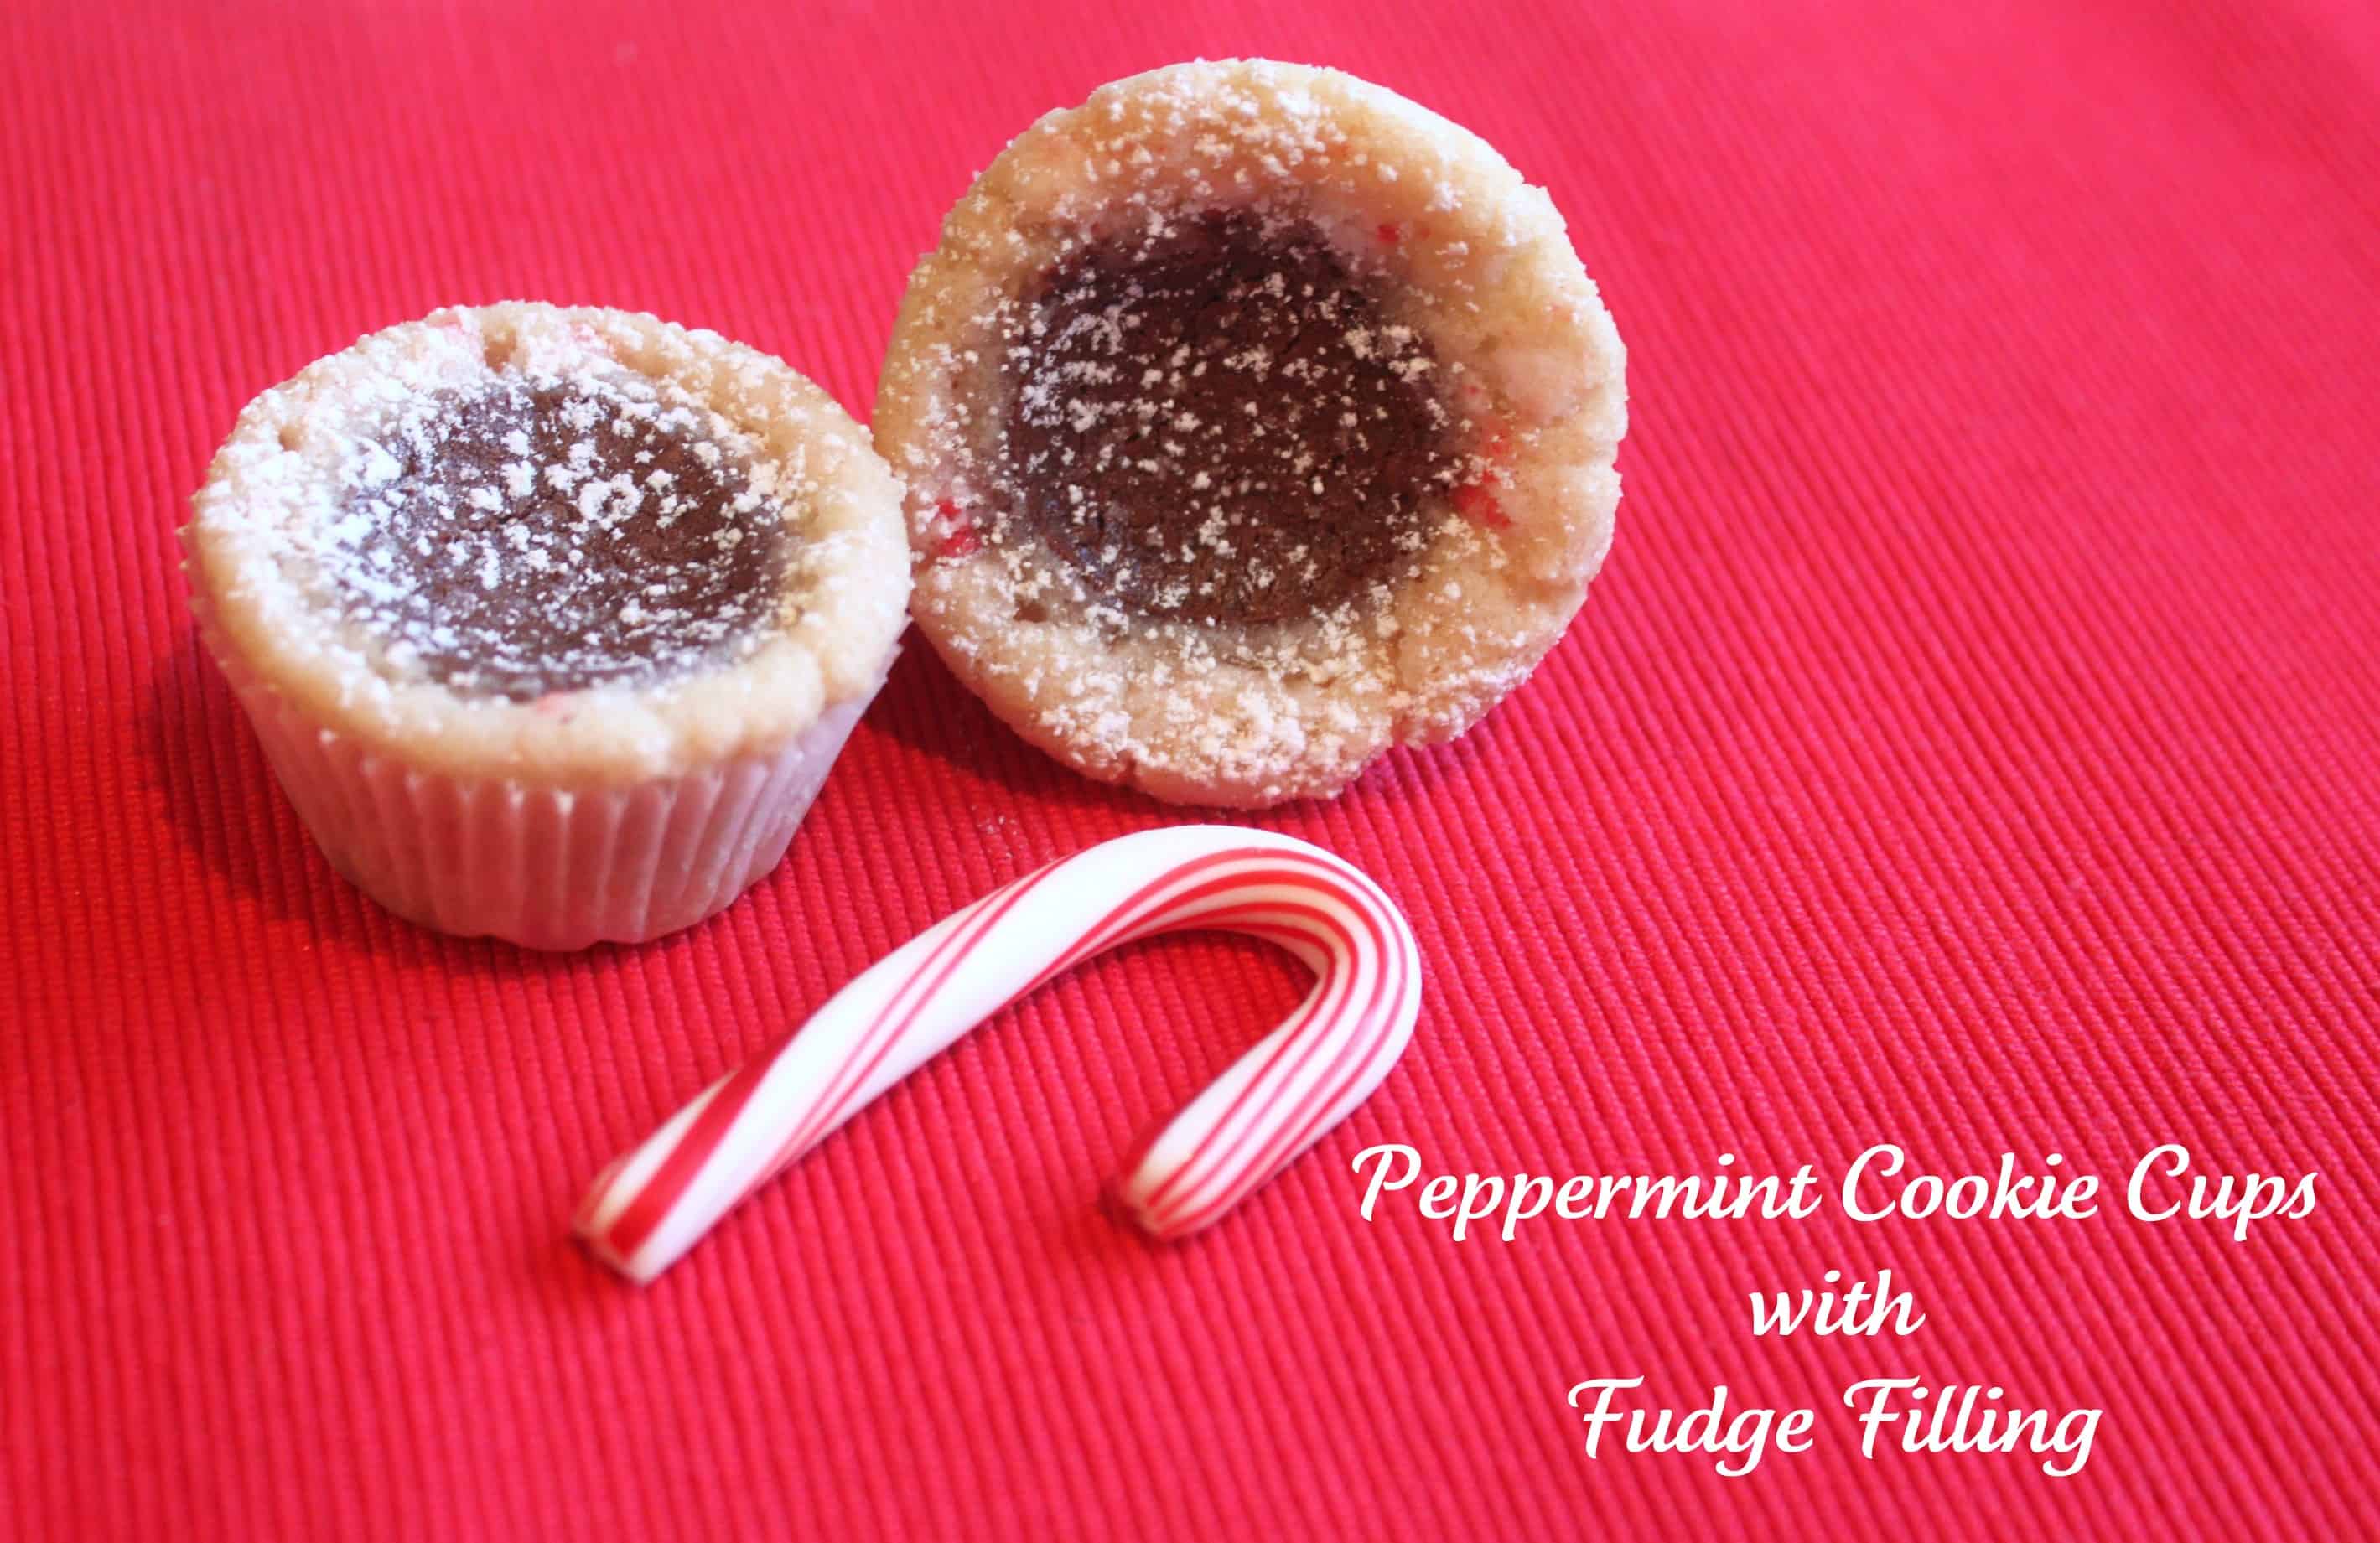 Peppermint Cookie Cups with Fudge Filling